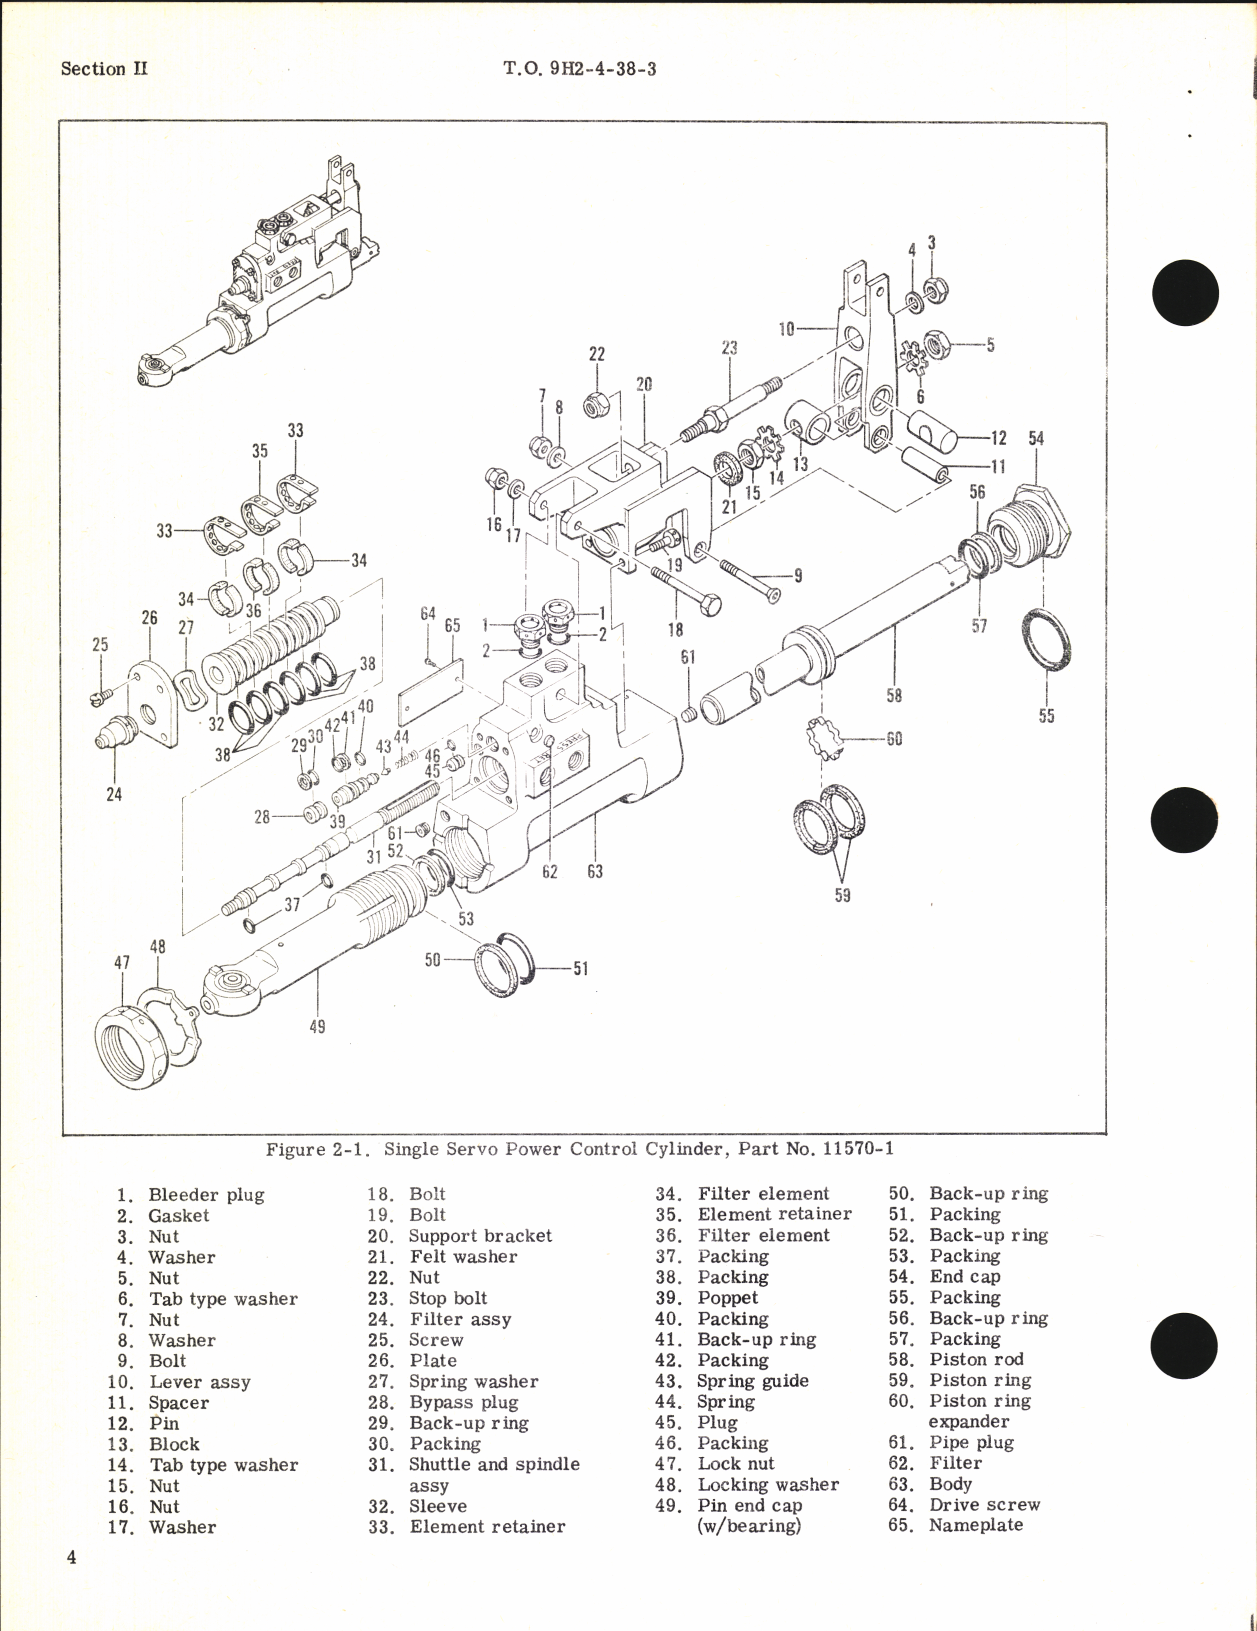 Sample page 6 from AirCorps Library document: Overhaul Instructions for Single Servo Power Control Cylinder Part No. 11570-1